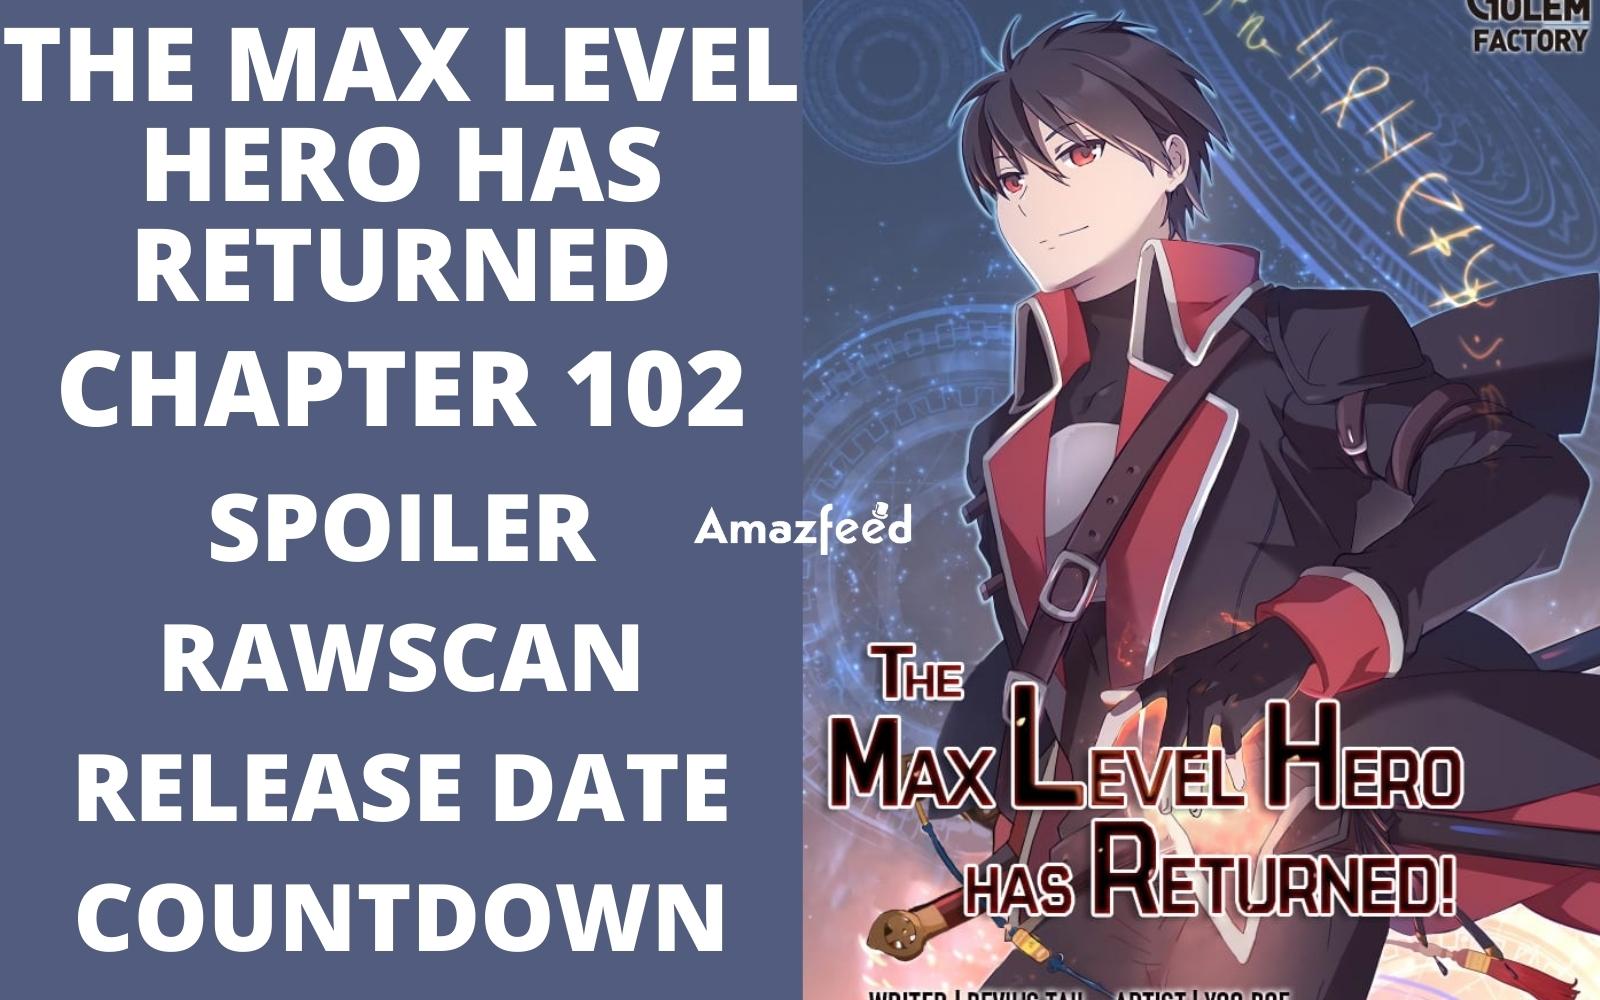 The Max Level Hero Has Returned Chapter 102 Spoiler, Release Date, Raw Scan, Countdown, Color Page